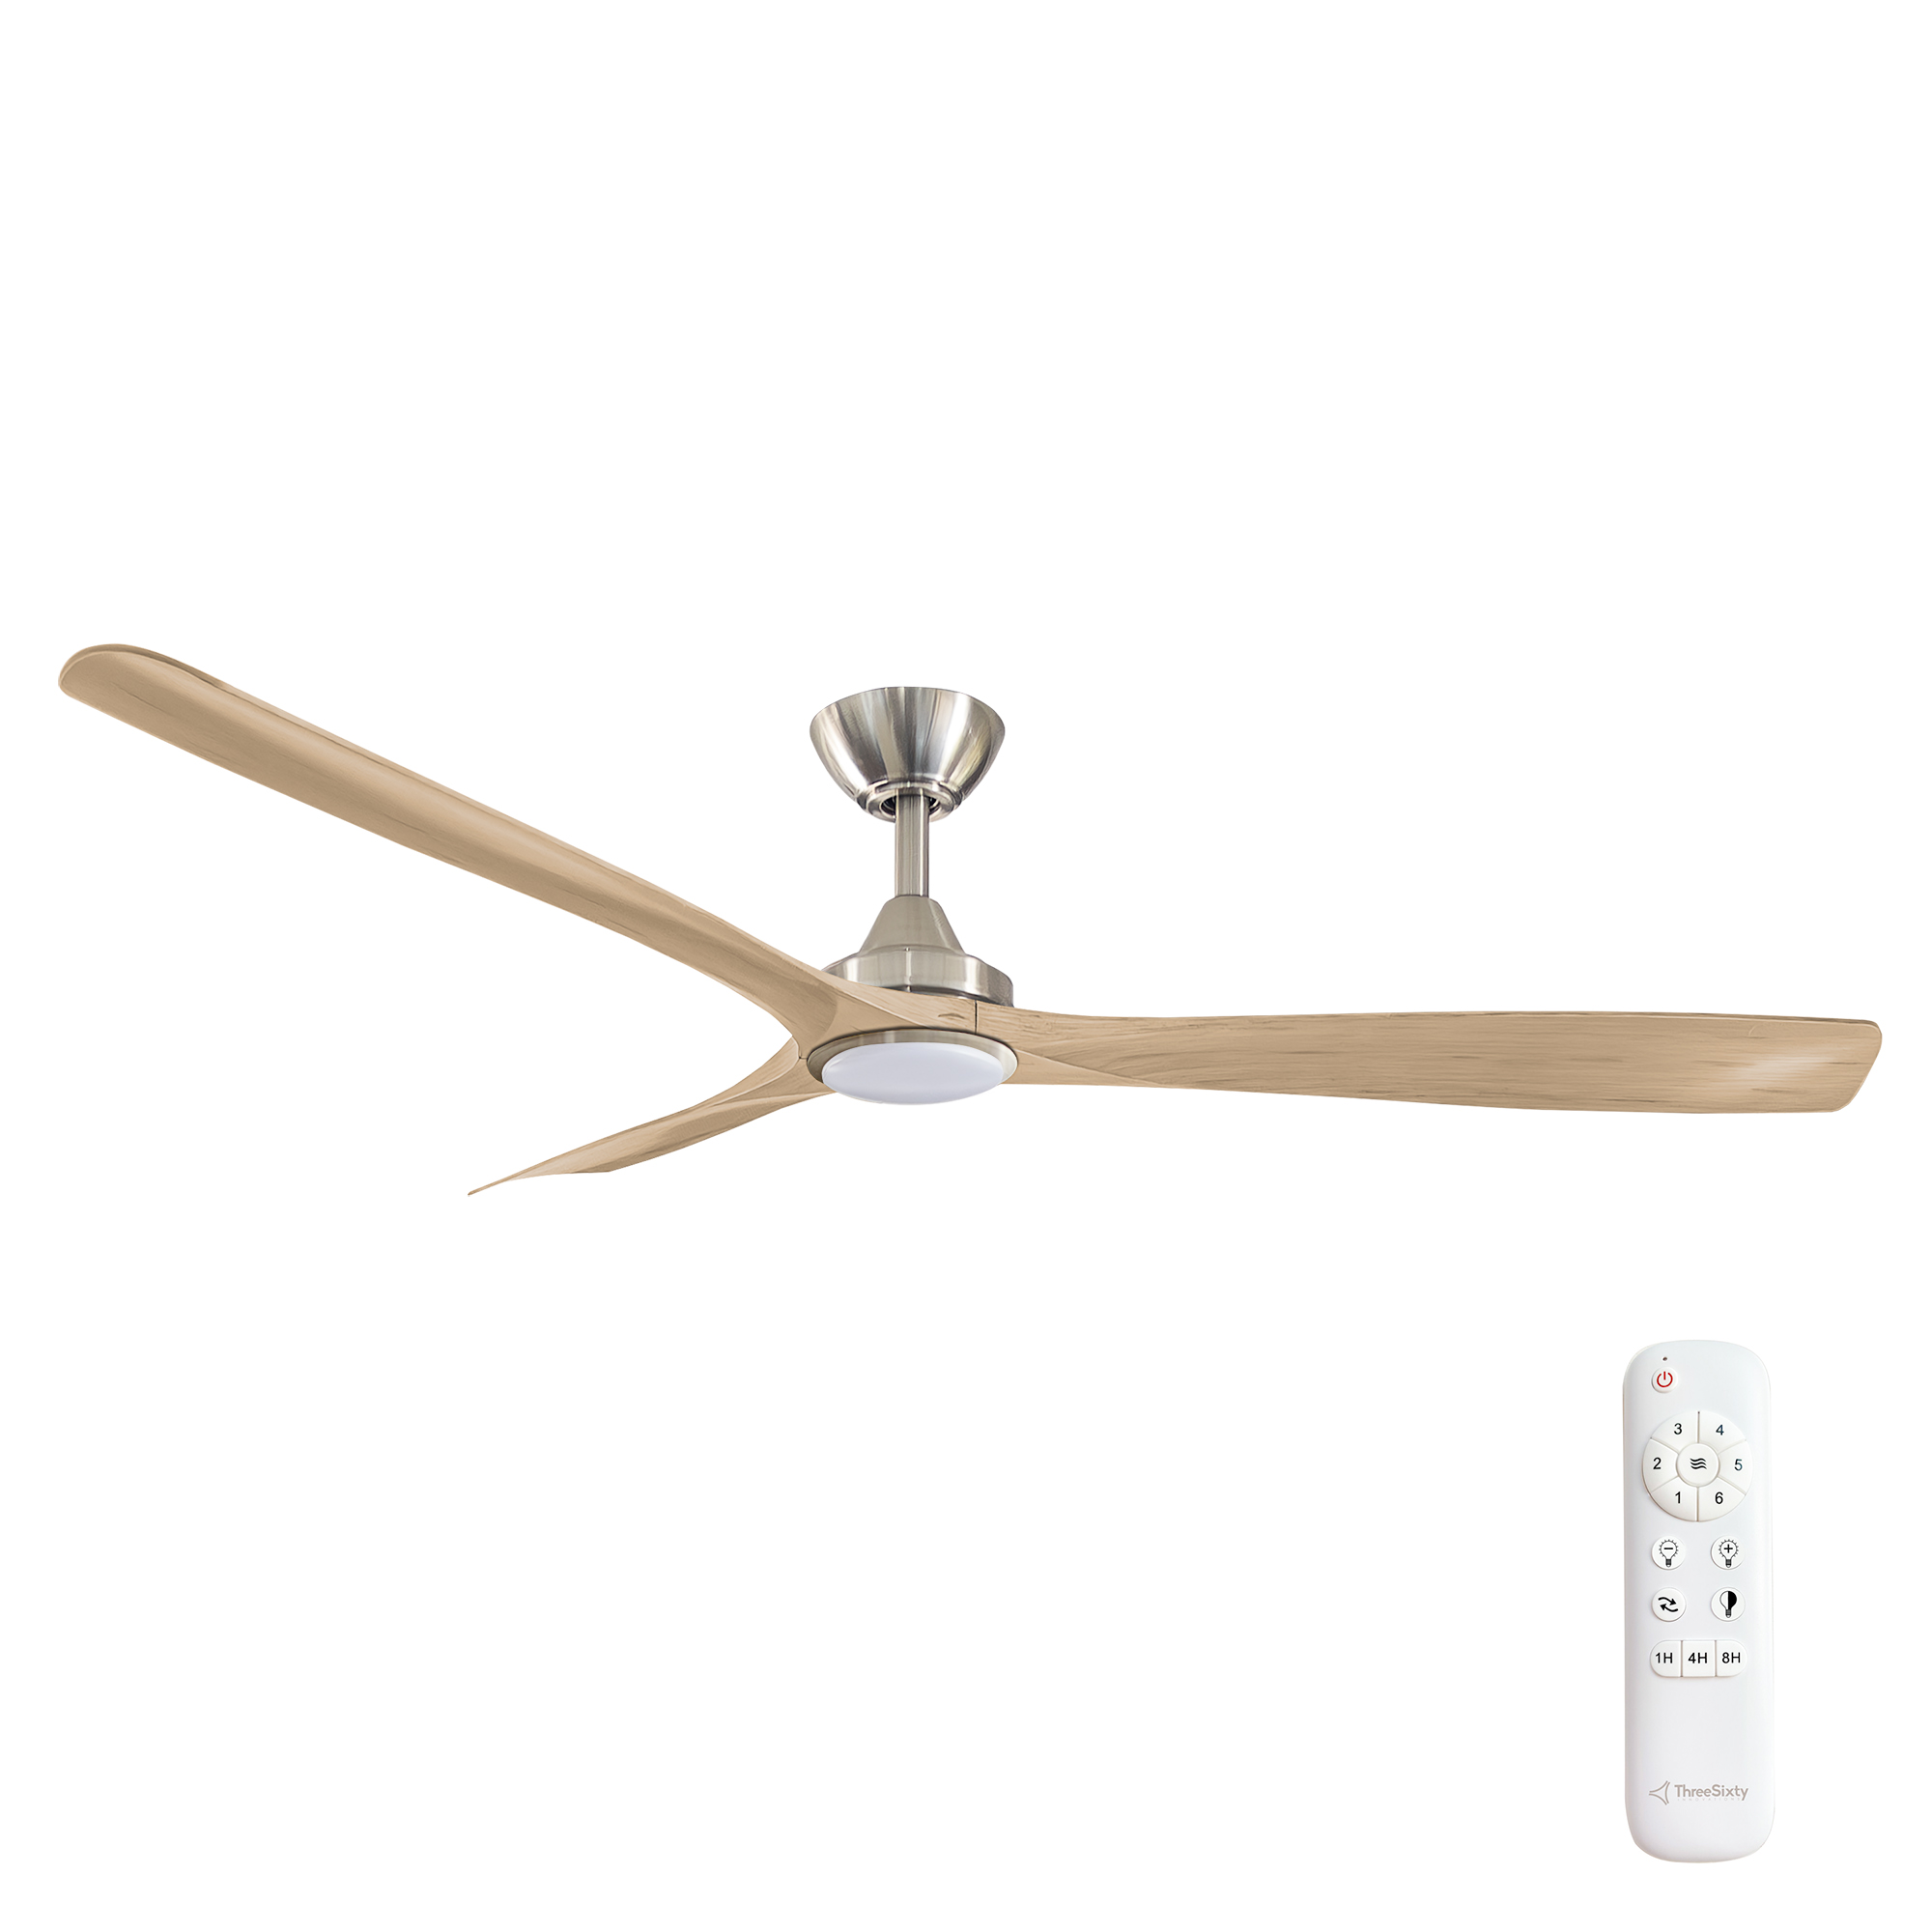 60" Spitfire DC Ceiling Fan in Brushed Nickel with Natural blades and 18W CCT LED Light